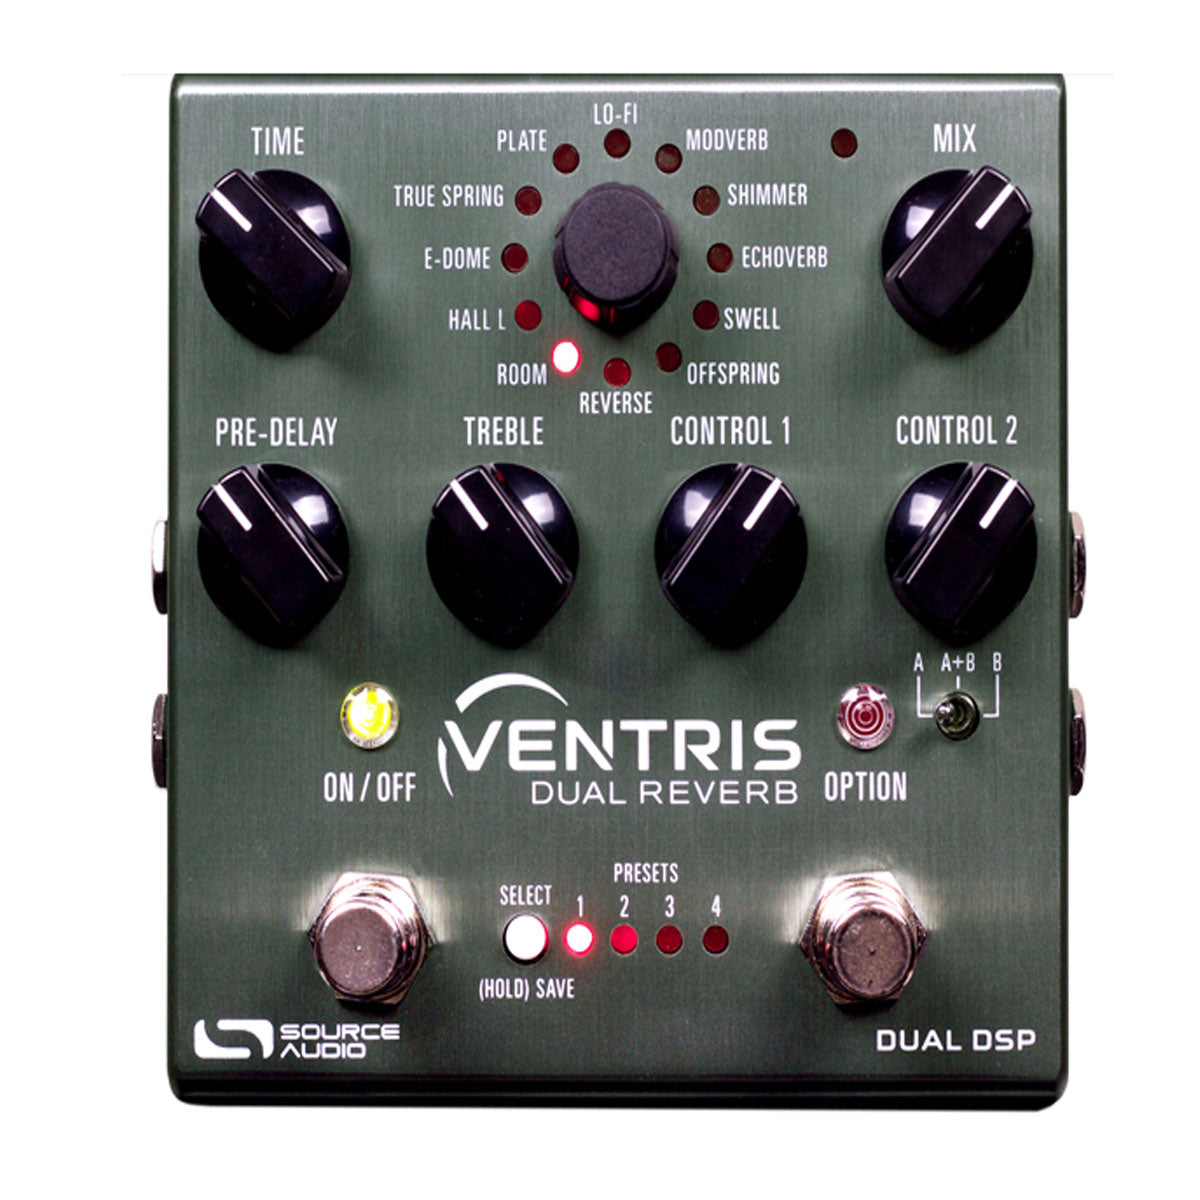 Source Audio One Series Ventris Dual Reverb Effects Pedal